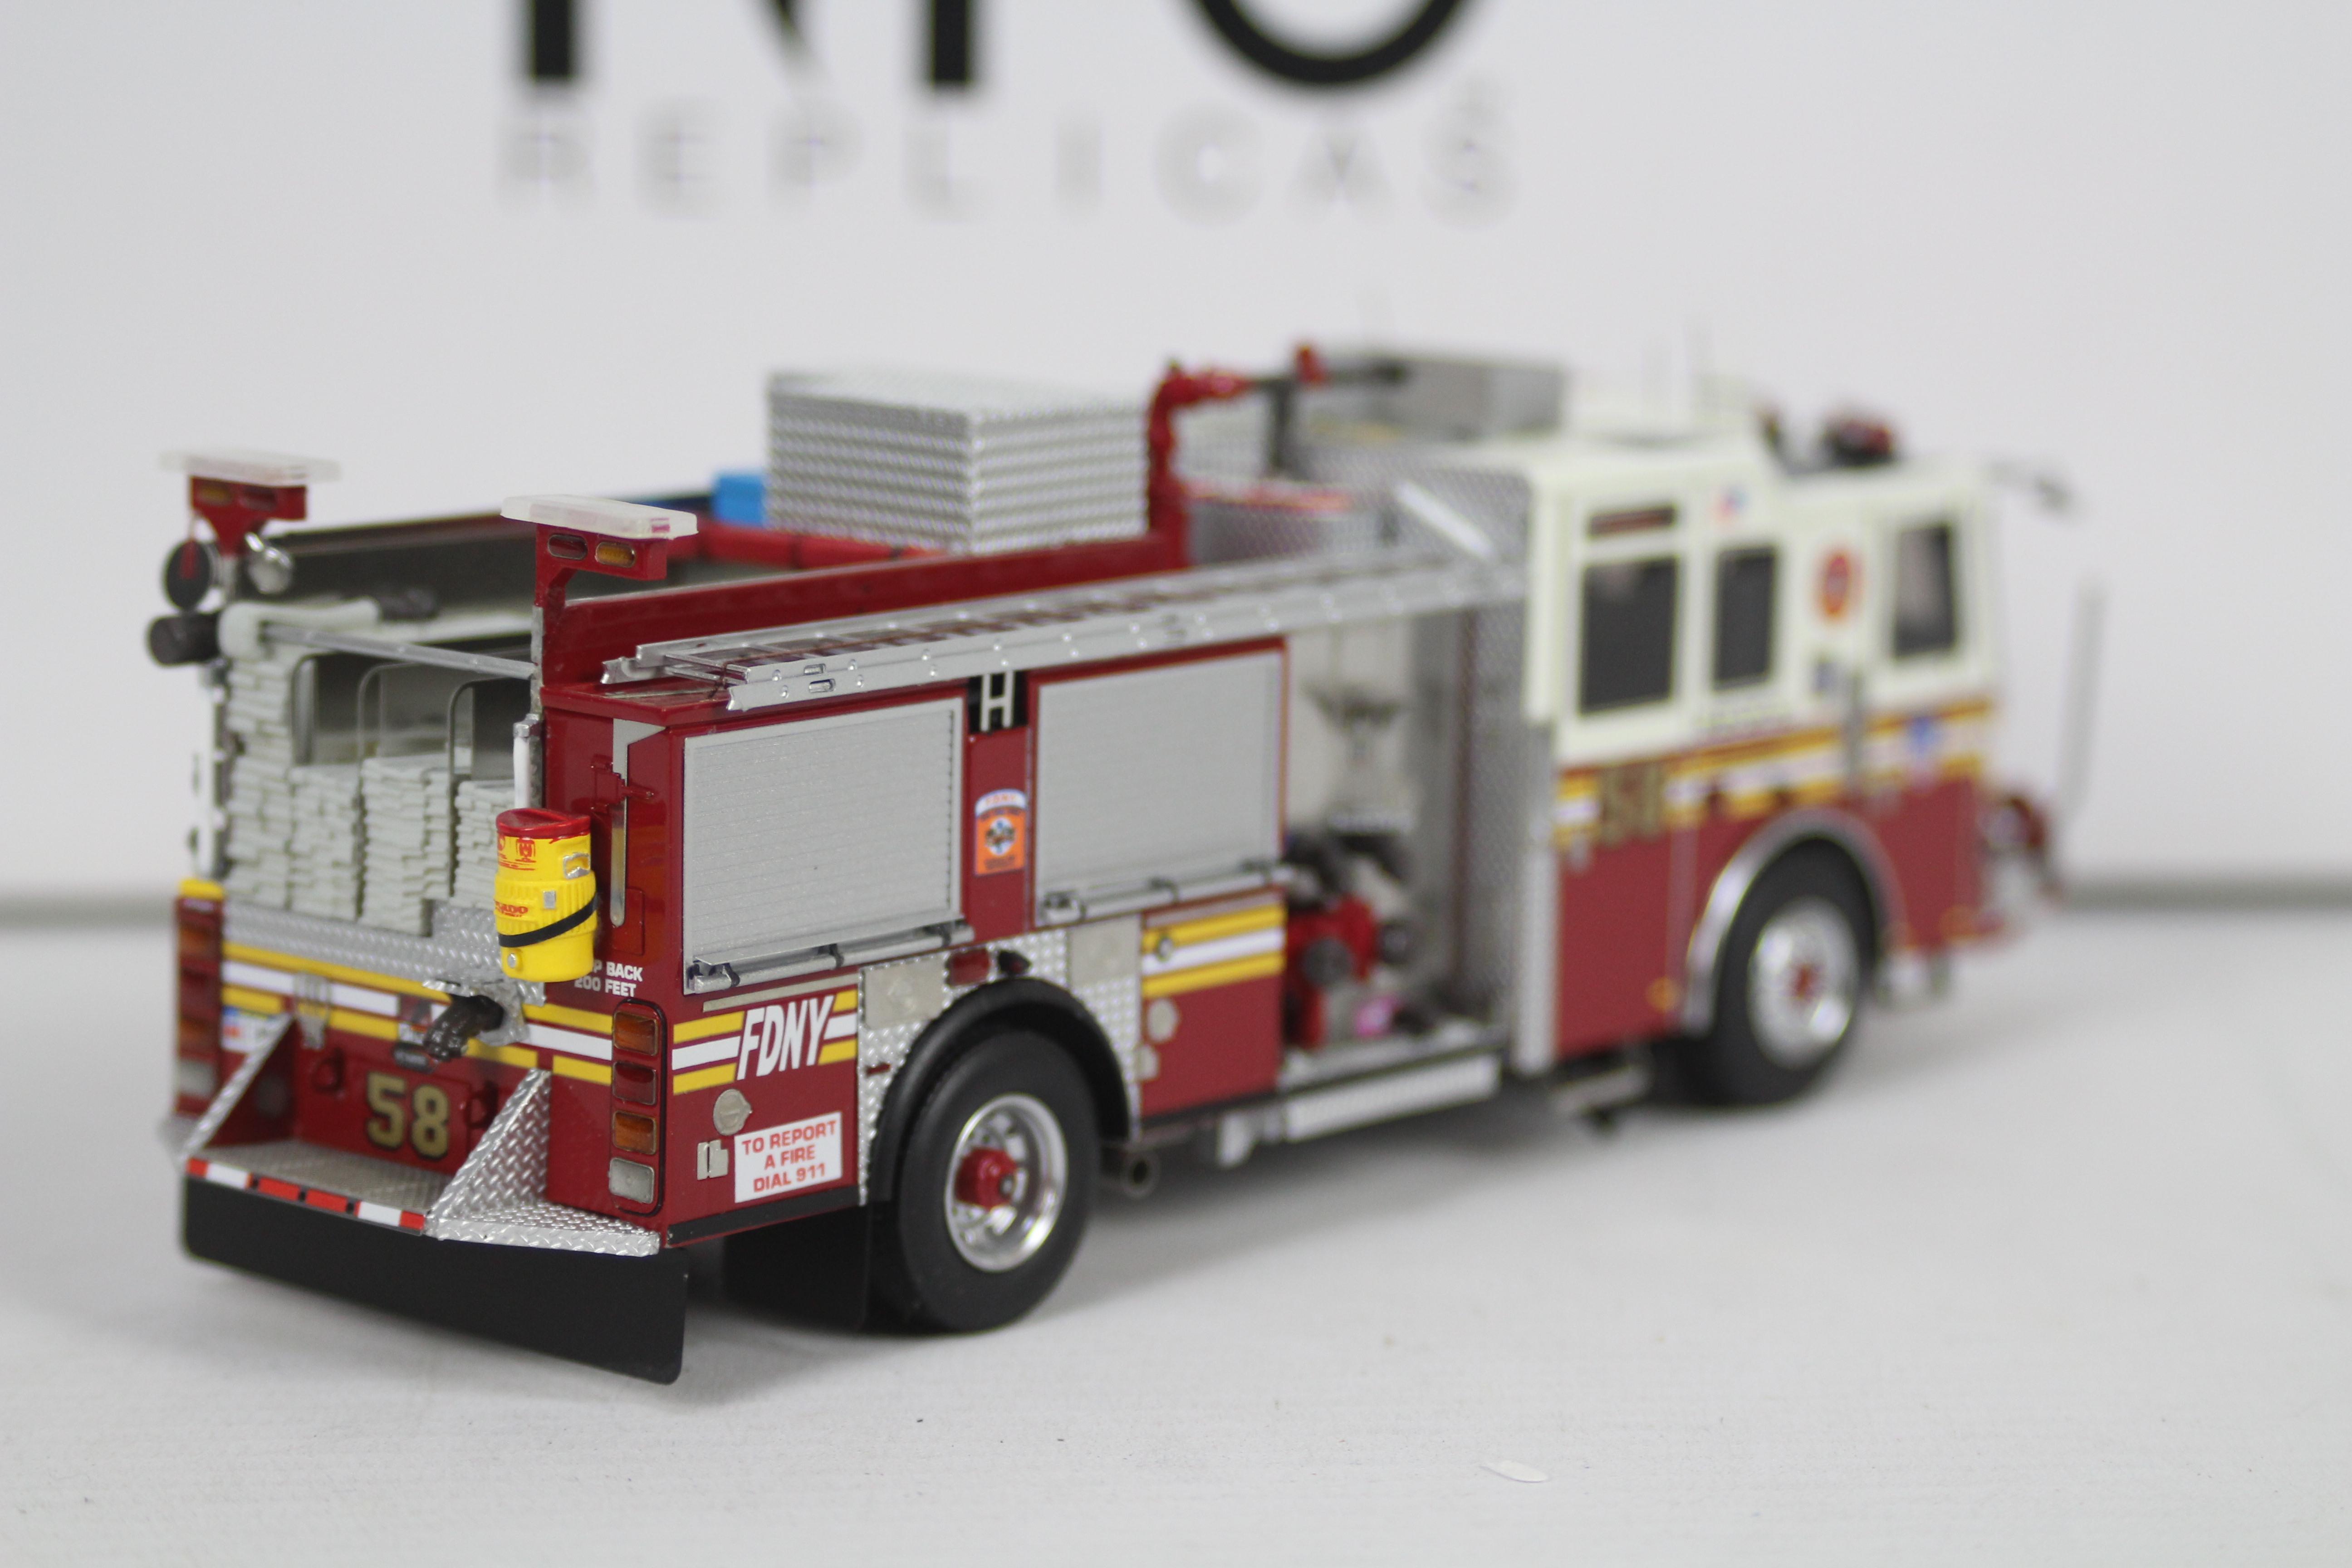 Fire Replicas - A boxed limited edition KME Severe Service Pumper Engine number 58 in FDNY livery - Image 5 of 5